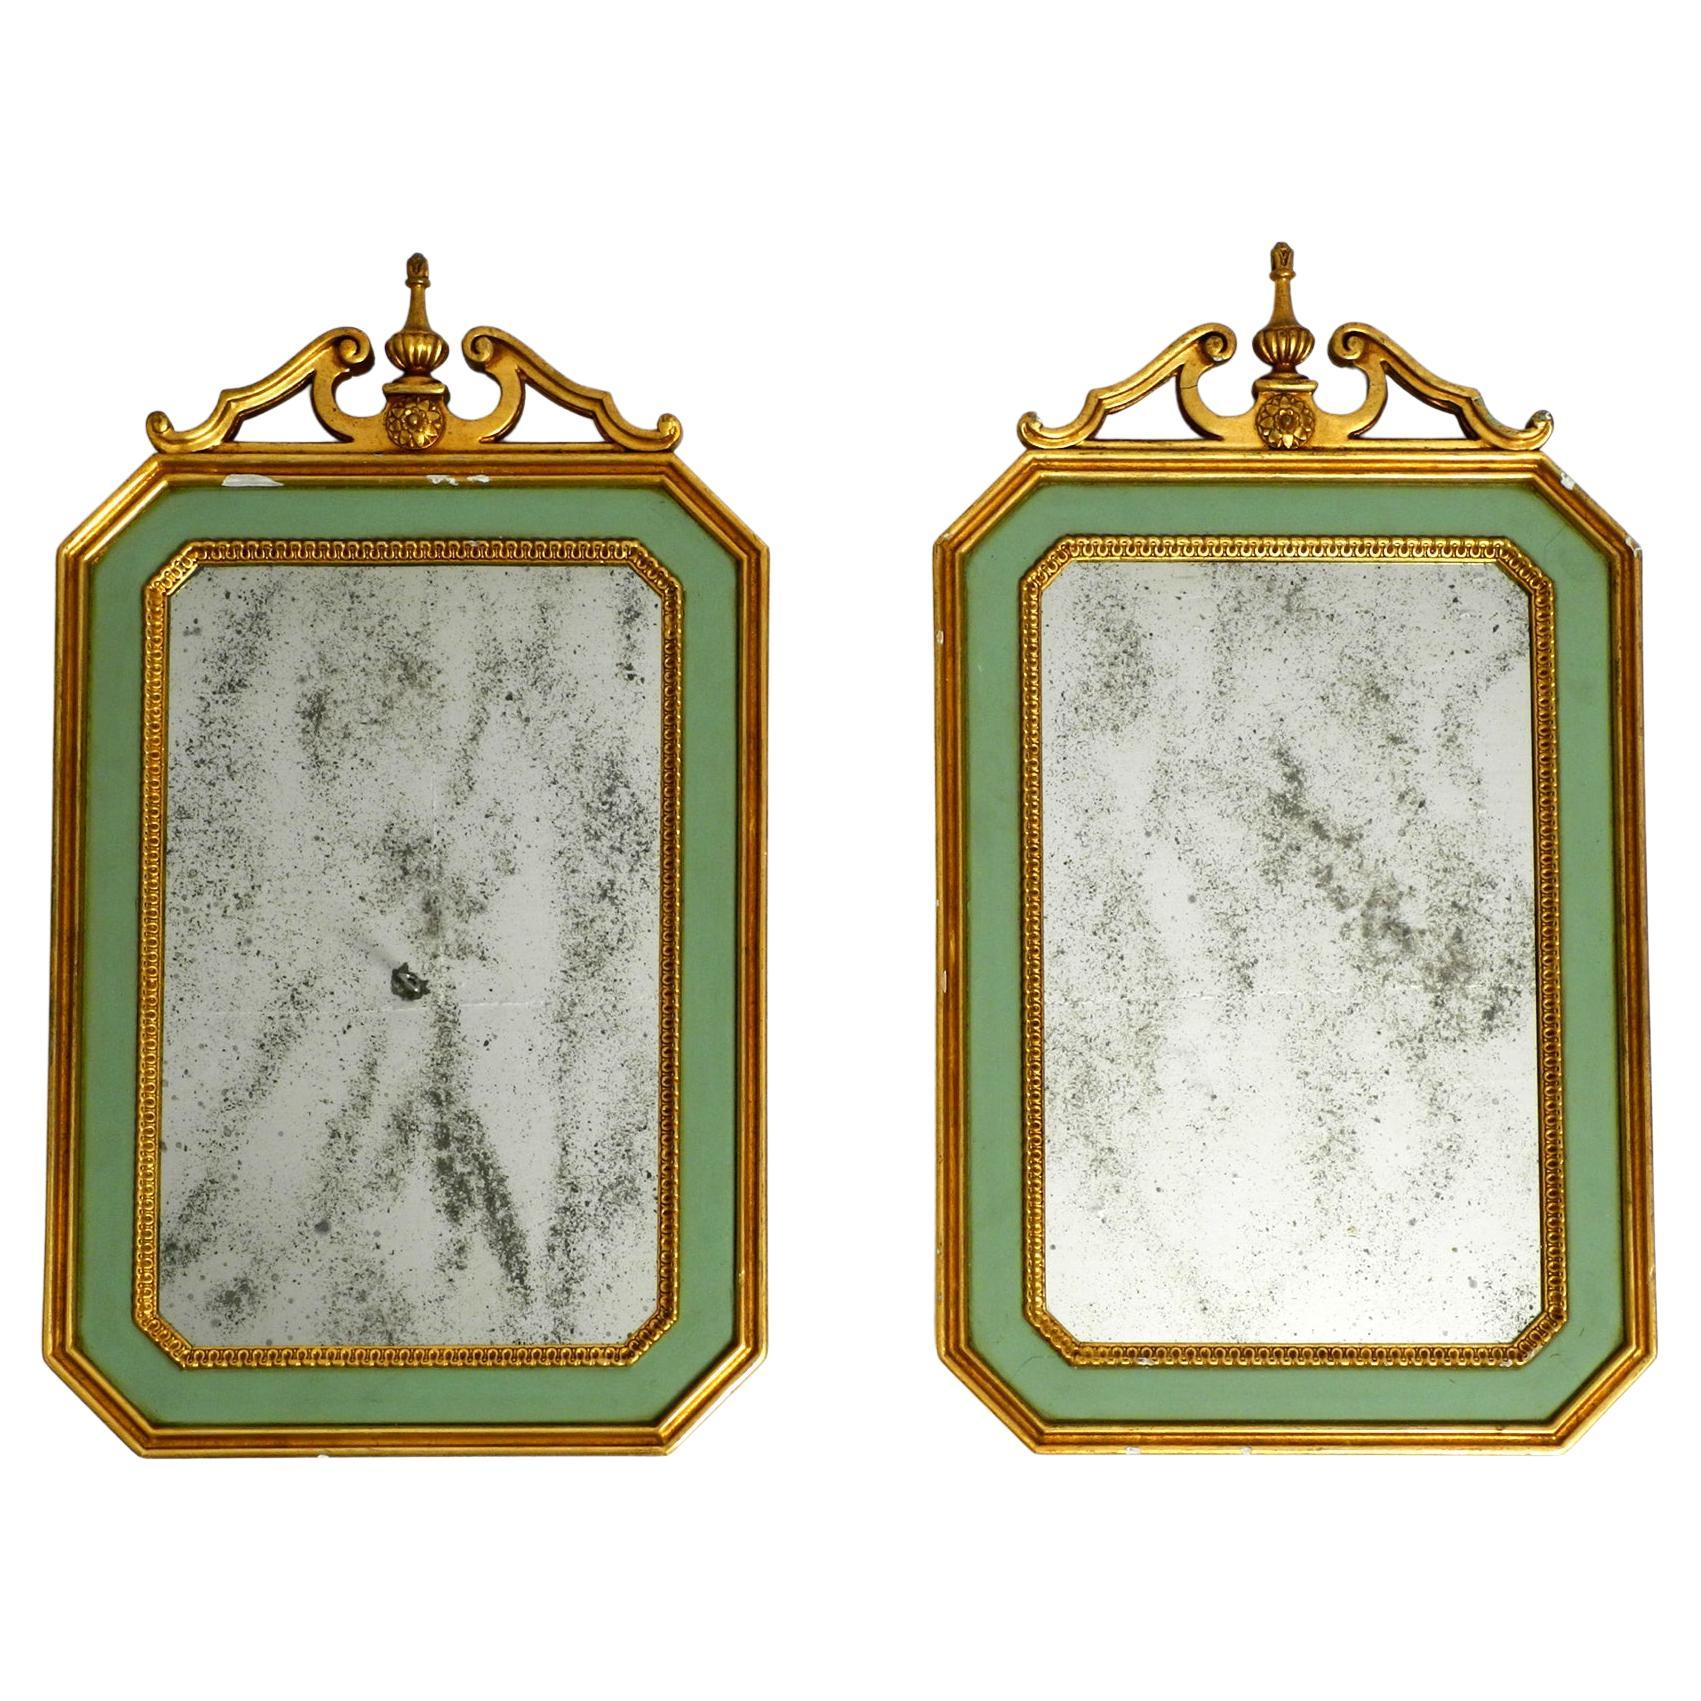 Two Beautiful Italian Mid Century Wall Mirrors Made of Wood, Partly Gilded